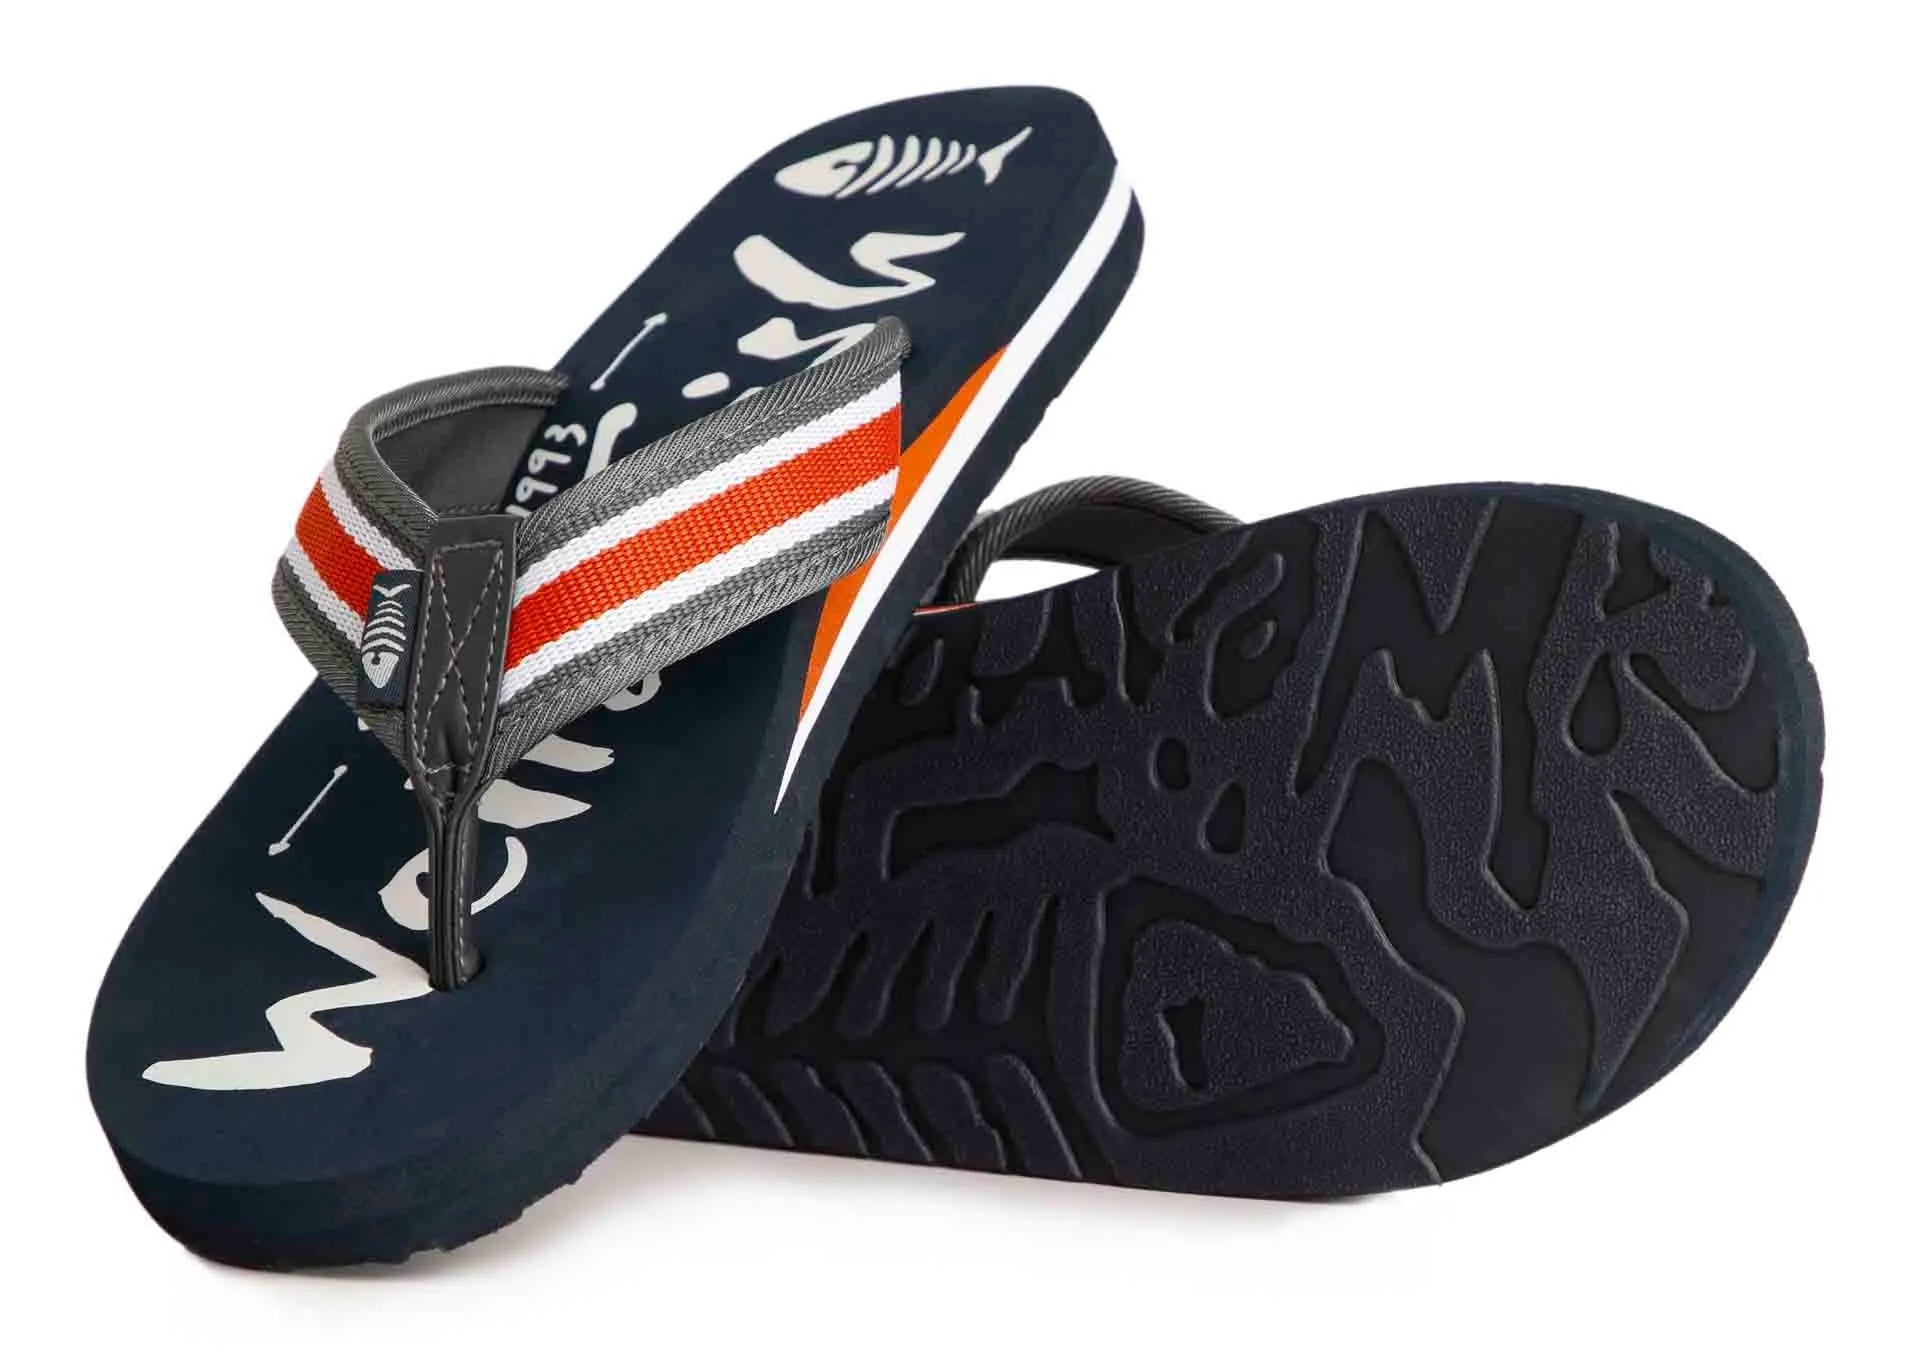 Weird Fish men's Waterford flip flops in Navy with a grey, white and orange stripe strap and logo shaped outsole grips.